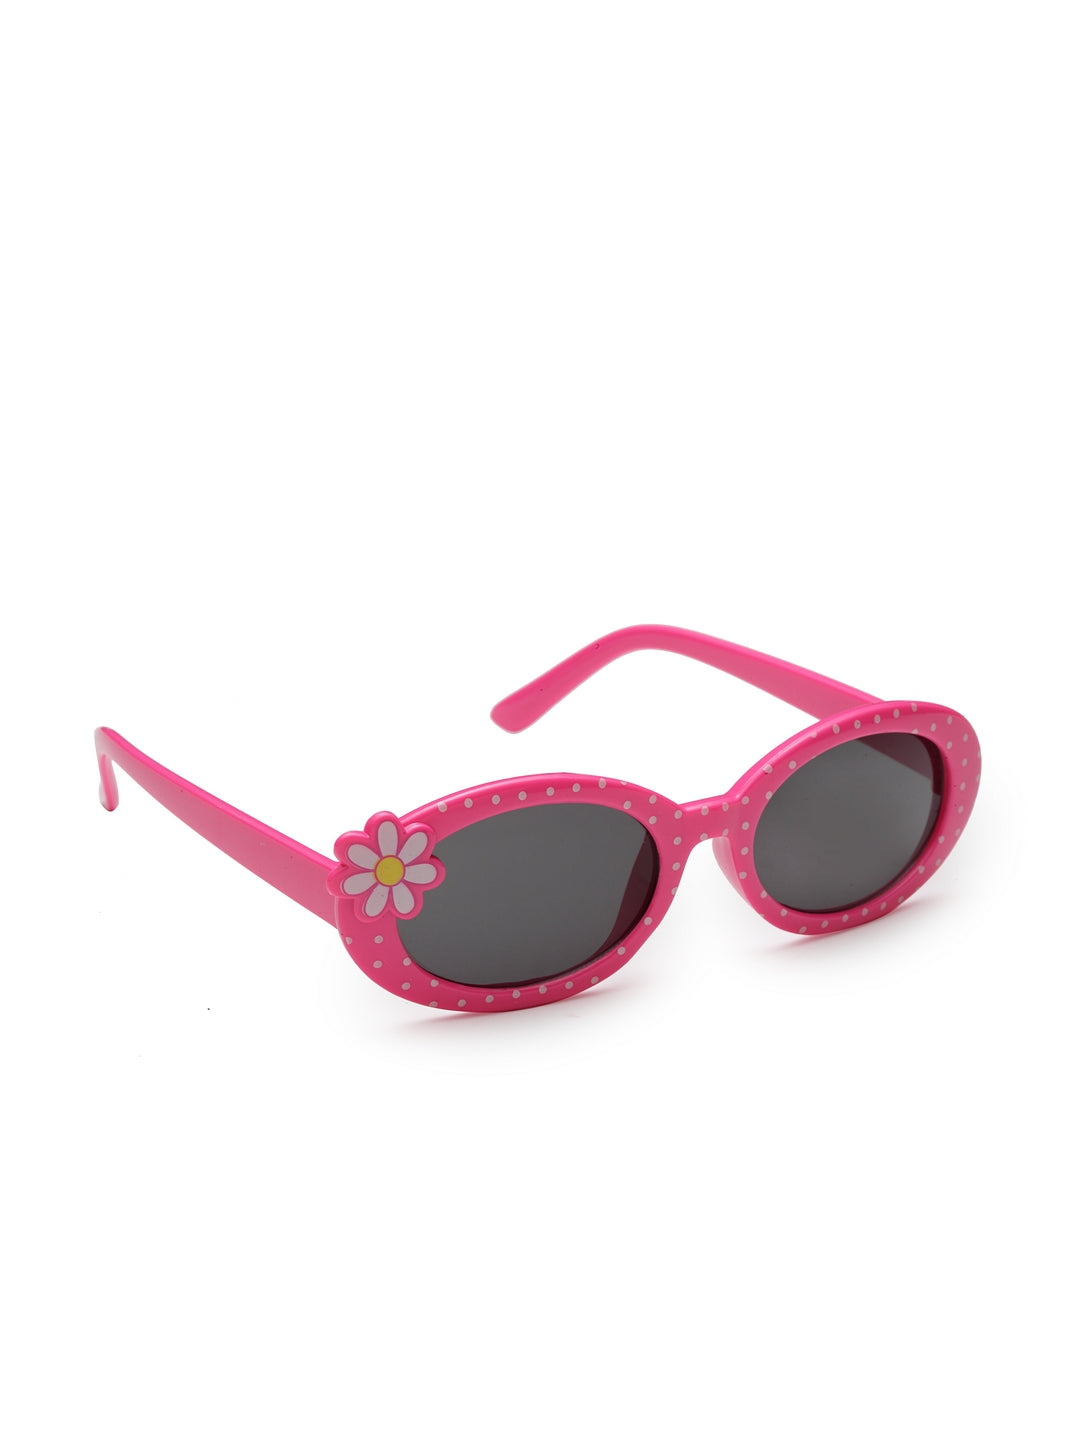 Stol'n Premium Attractive Fashionable UV-Protected Oval Shape Sunglasses - Pink